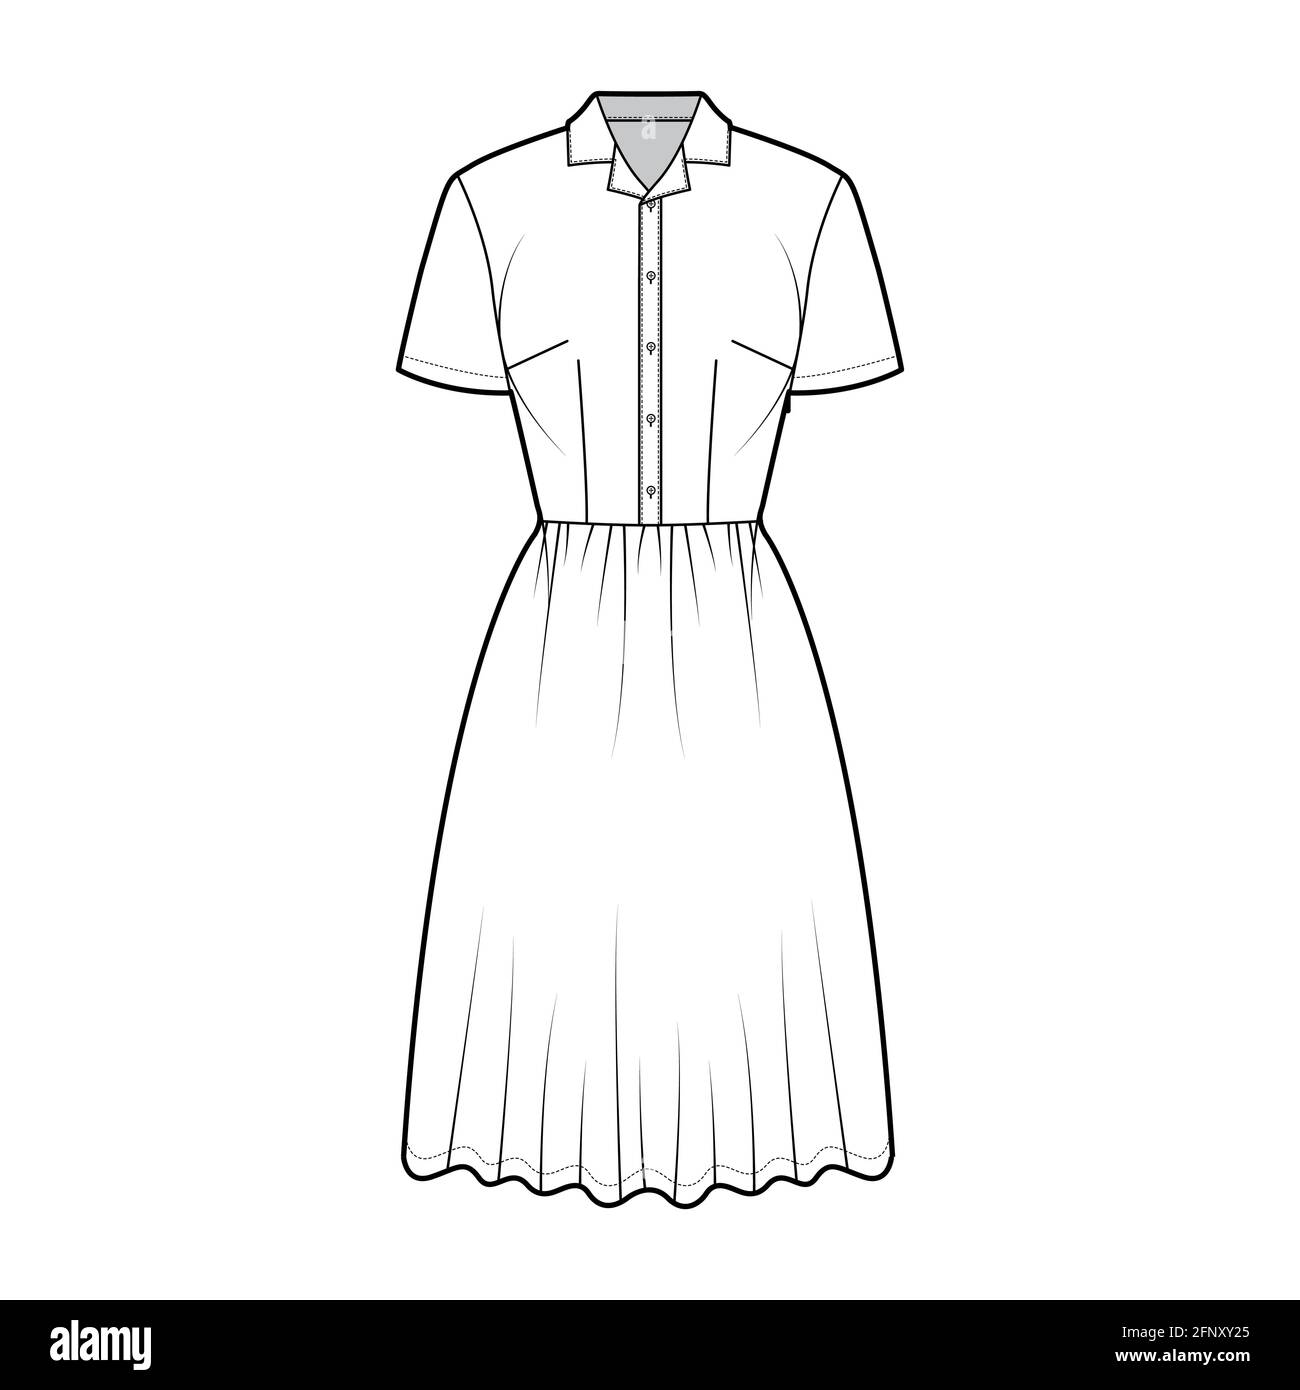 Dress house shirt technical fashion illustration with short sleeves ...